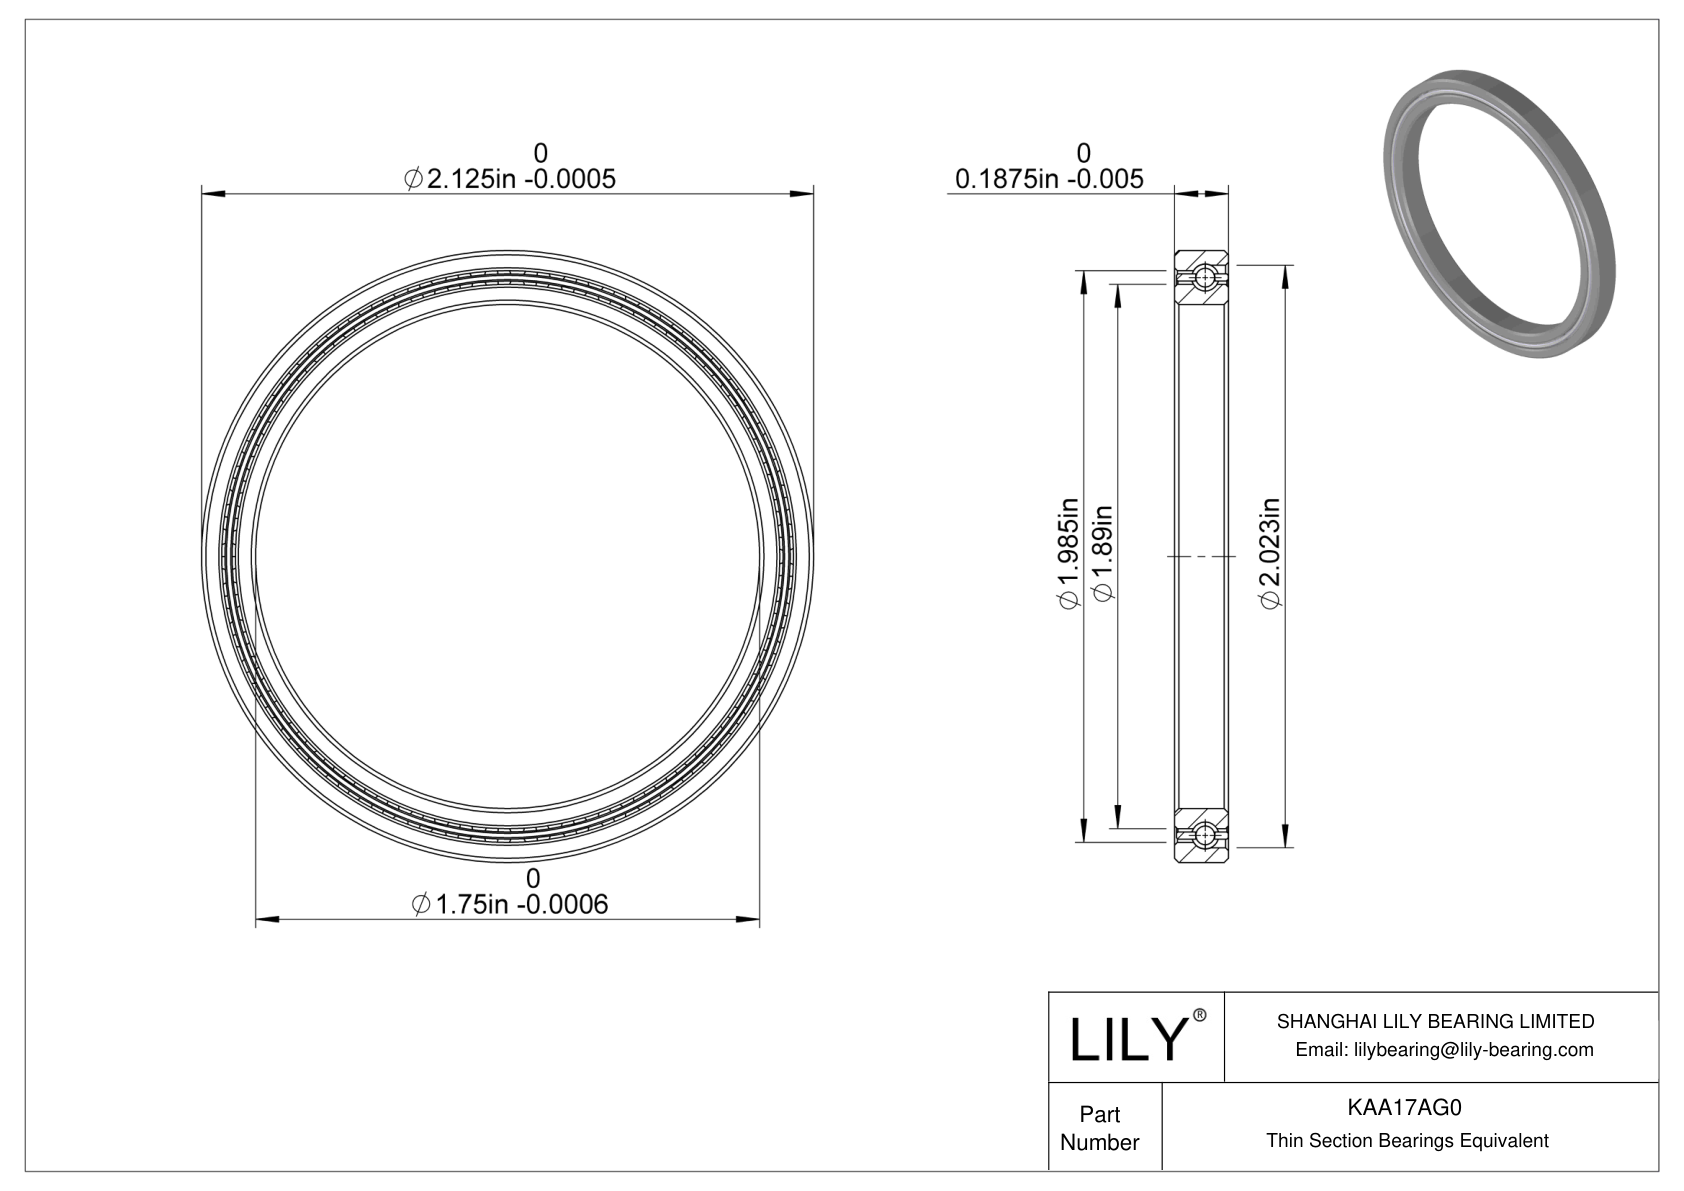 KAA17AG0 Constant Section (CS) Bearings cad drawing